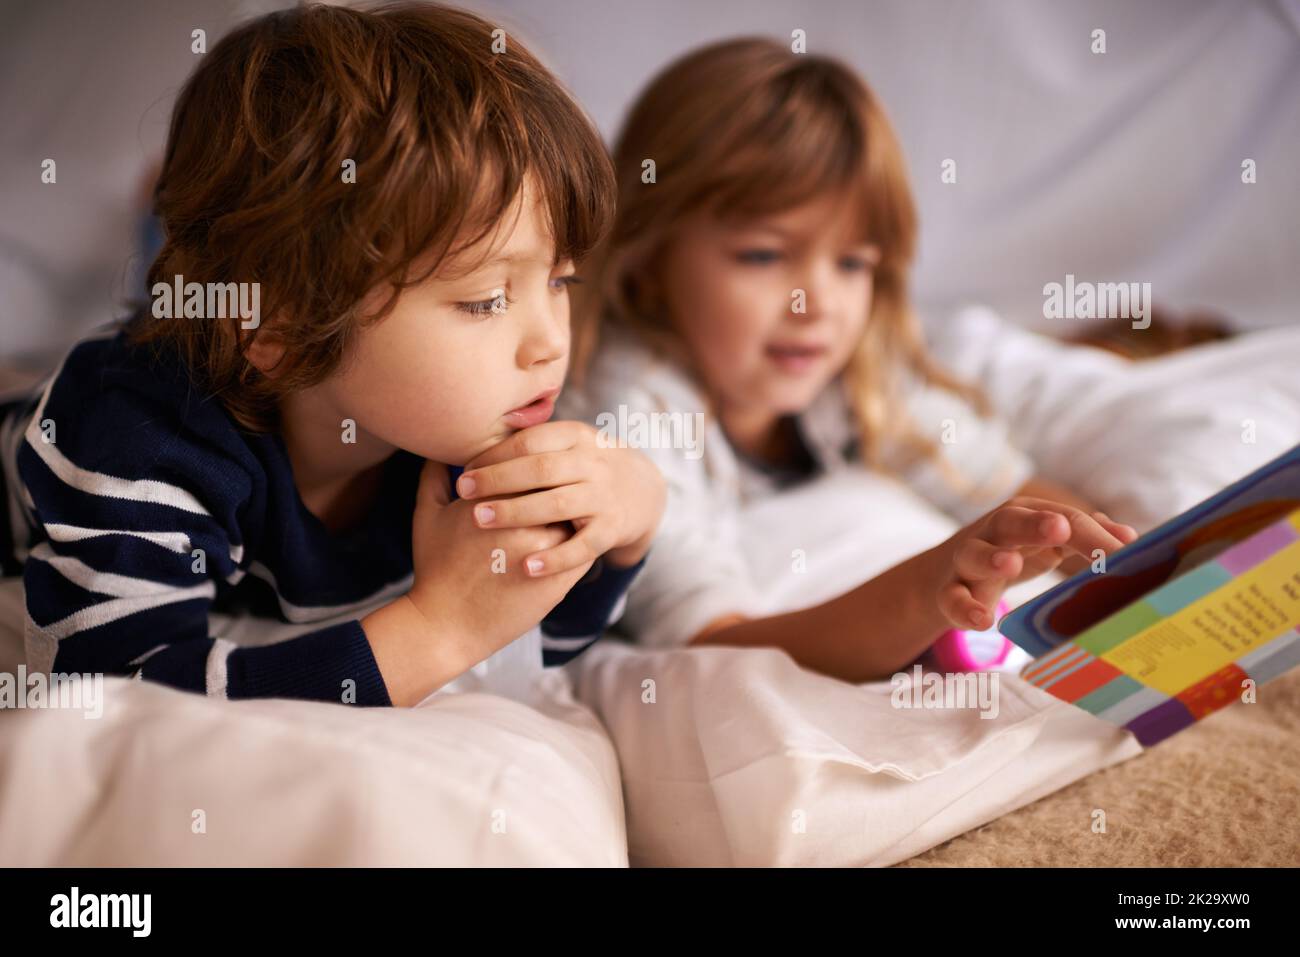 Fairytales under the fort. two adorable siblings using torches to read a book inside their blanket fort. Stock Photo